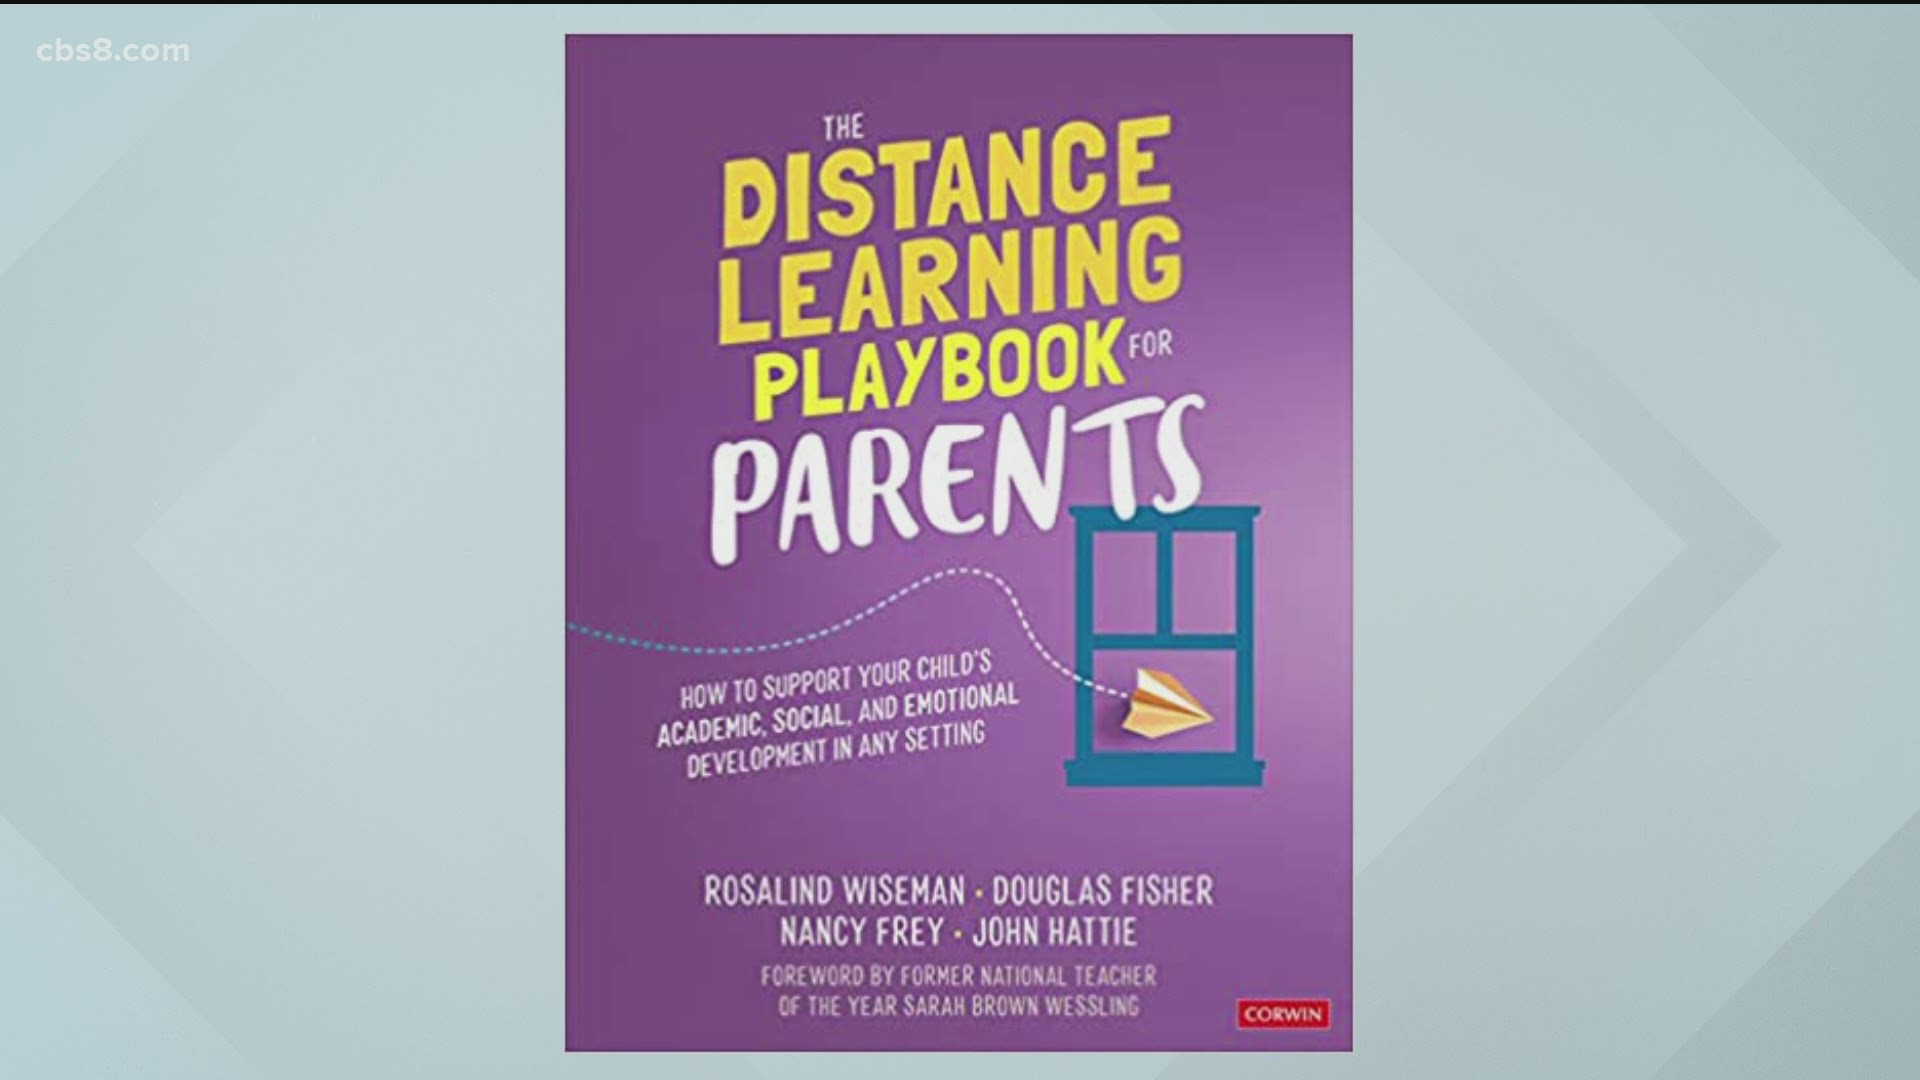 Rosalind Wiseman, co-author of 'The Distance Learning Playbook for Parents,' joined Morning Extra Thursday to talk about helping parents who are struggling.